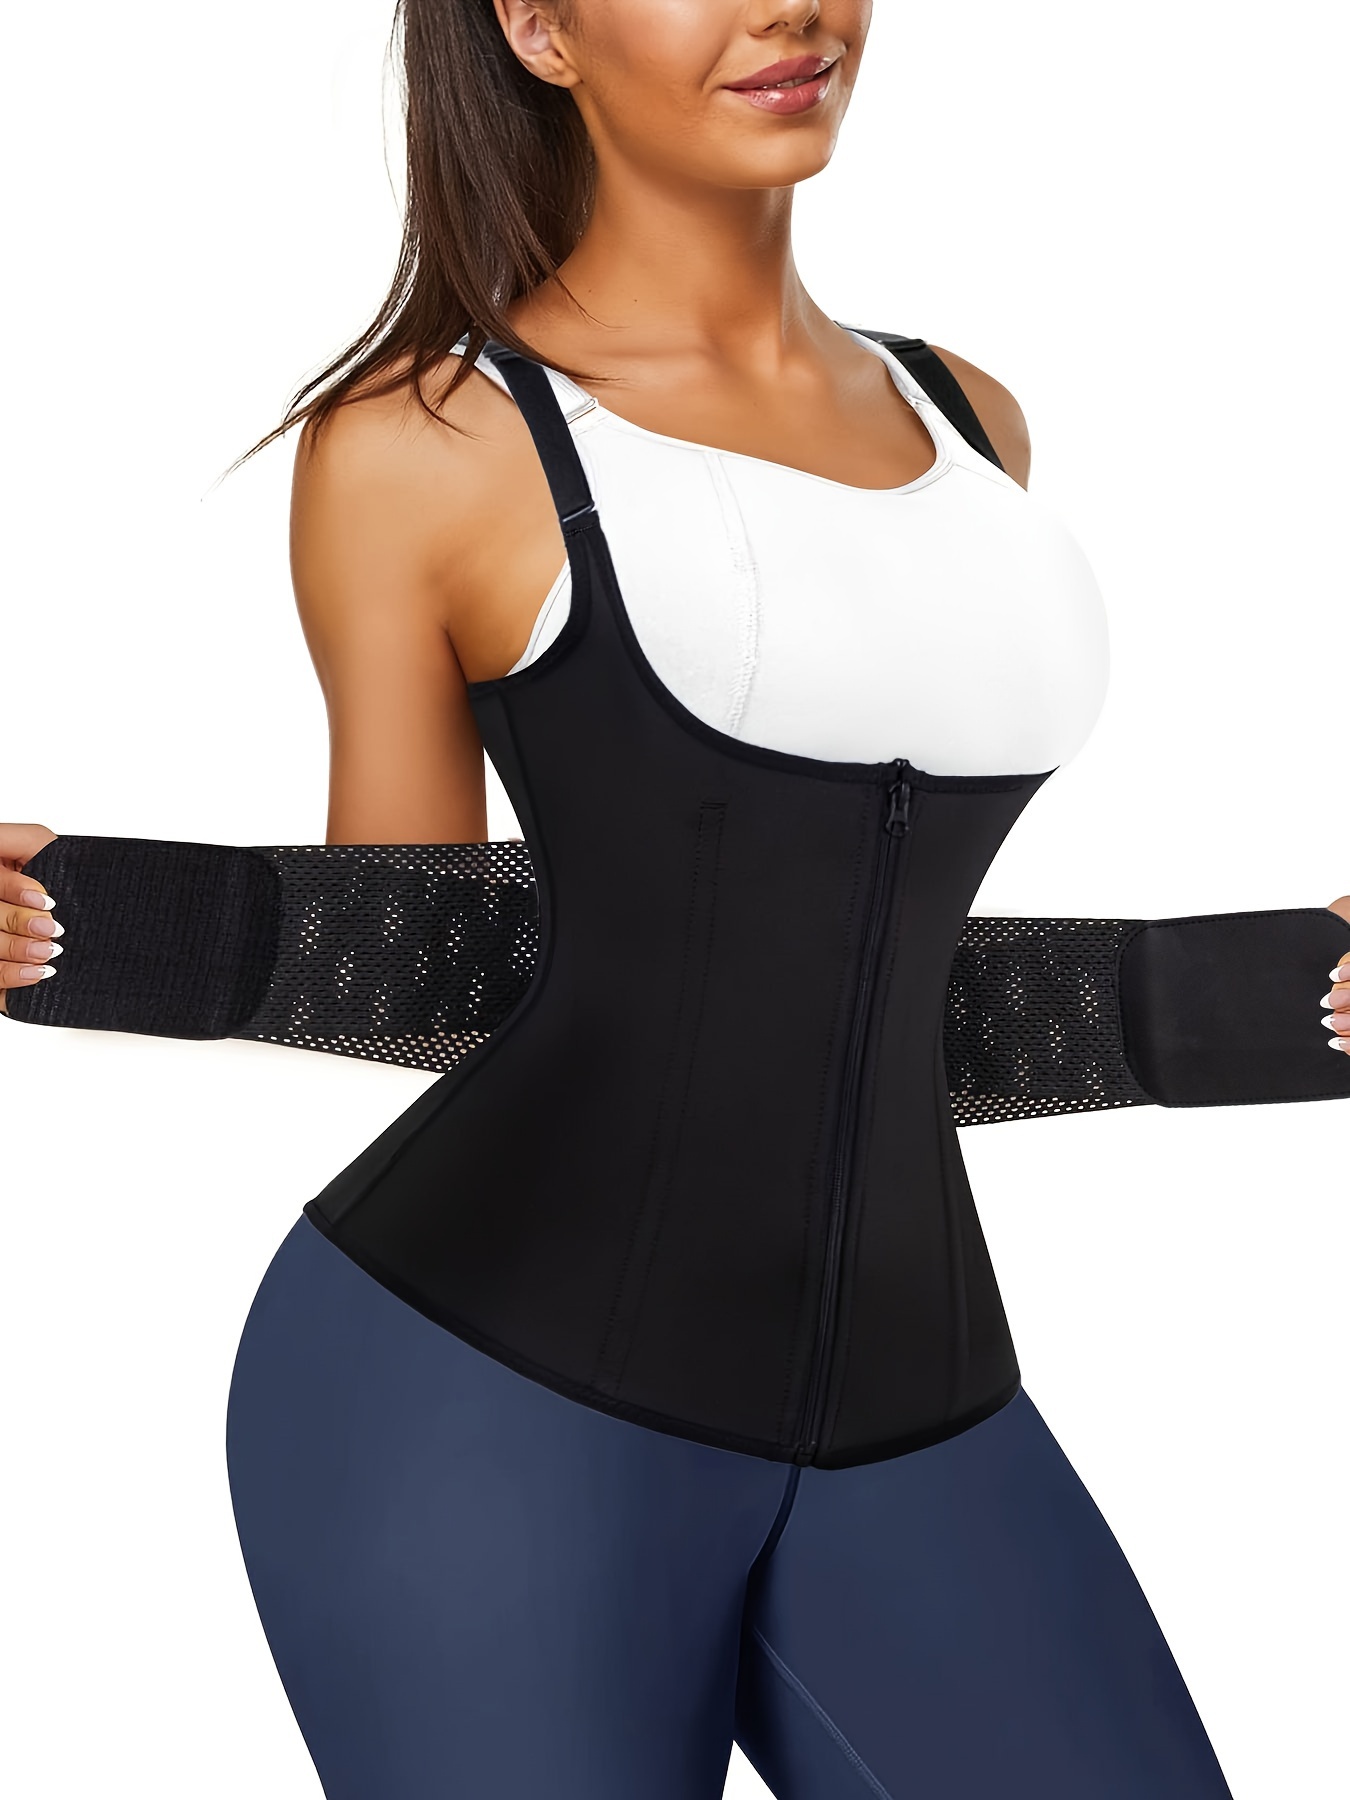 Black Womens Body Shaper Corset With Tummy Sweat Belt, Waist Slimming, And  Fitness Training Sauna Suit Trainers For High Waisted Undergarments And  Modeling From Tieshome, $4.8